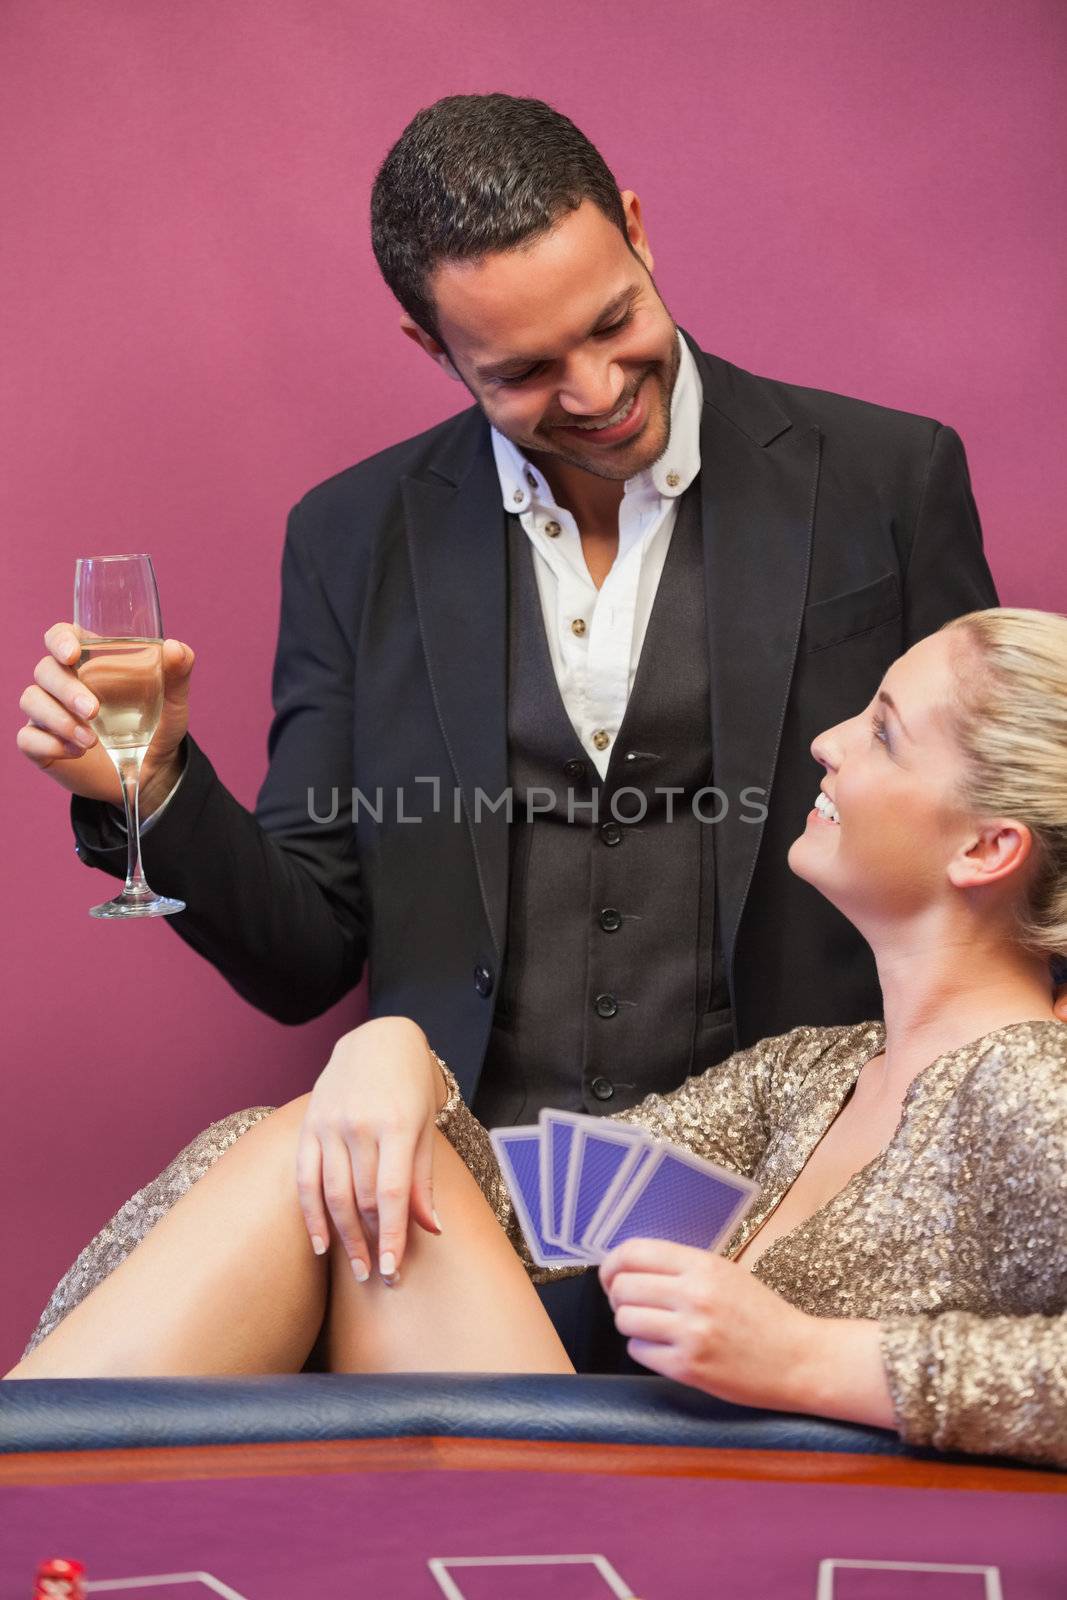 Two people flirting at poker table by Wavebreakmedia